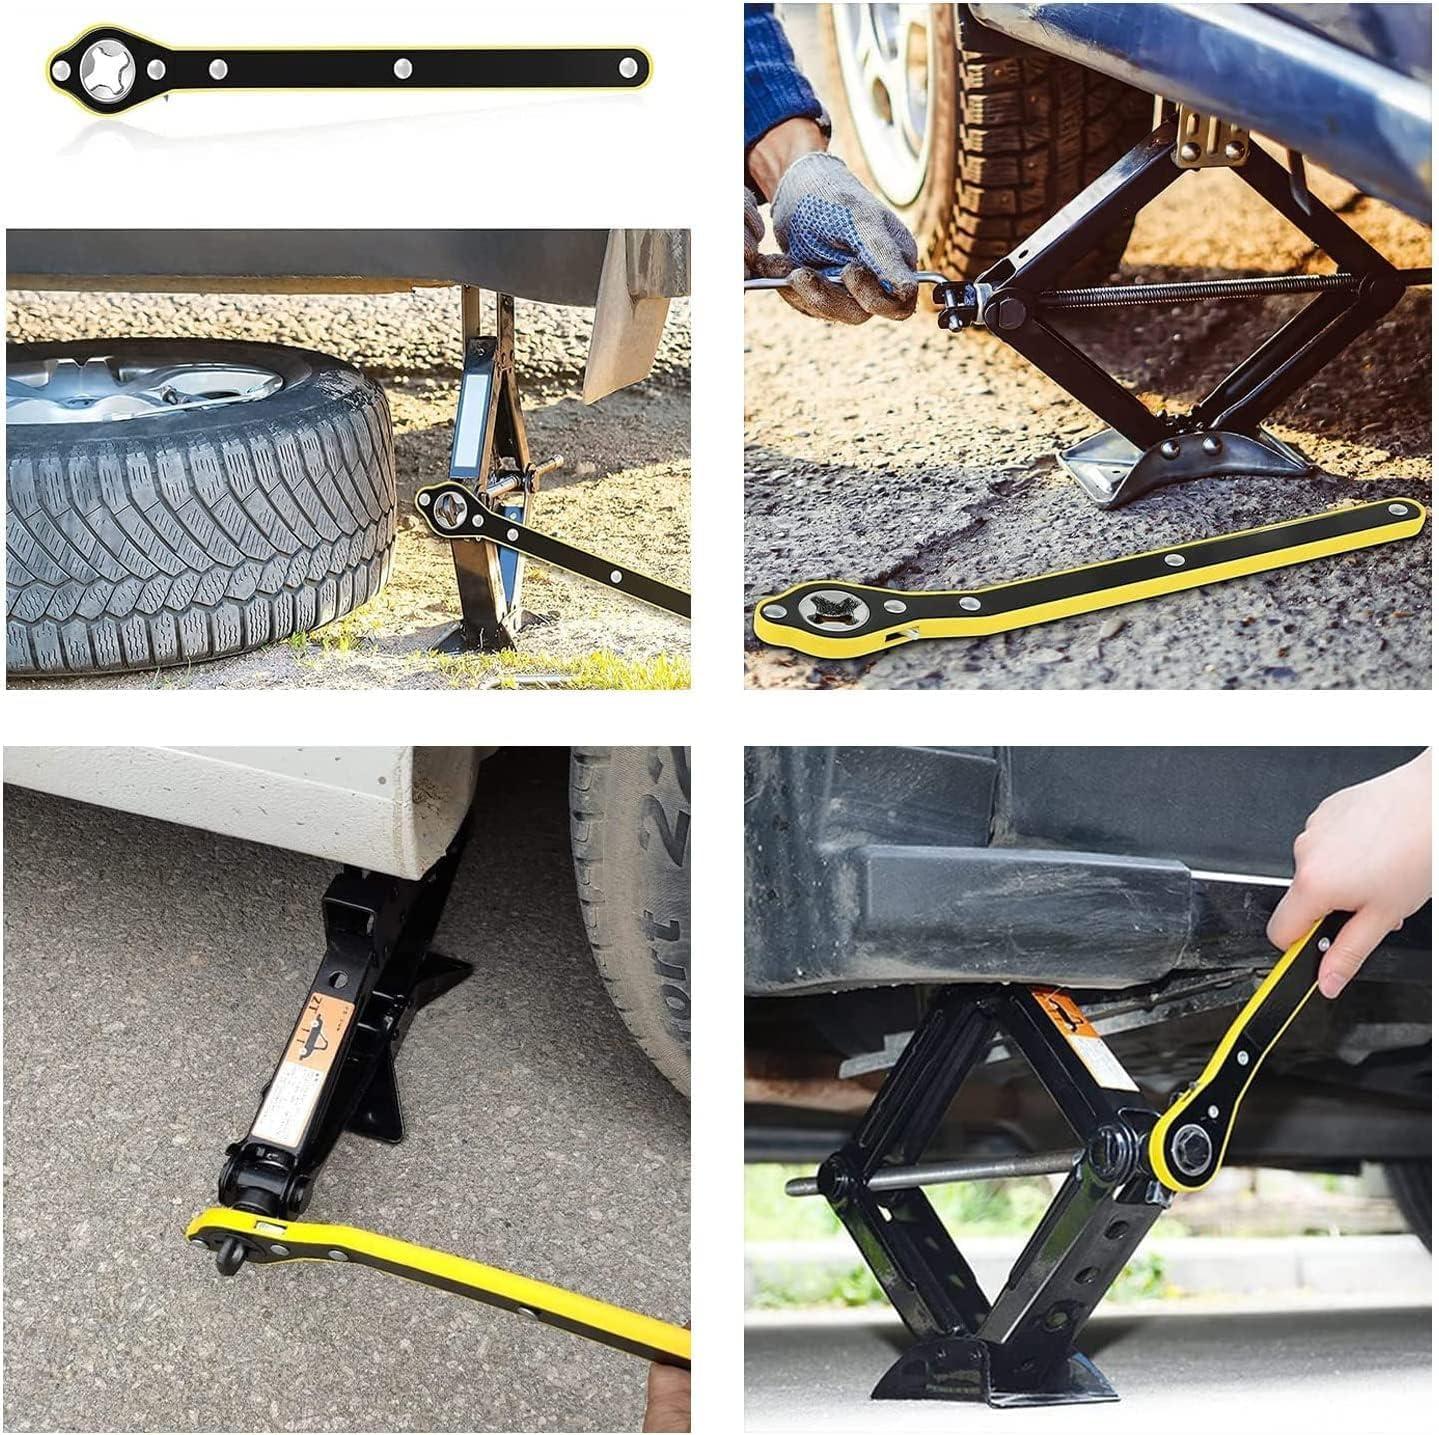 Lug Wrench for Tire Jack